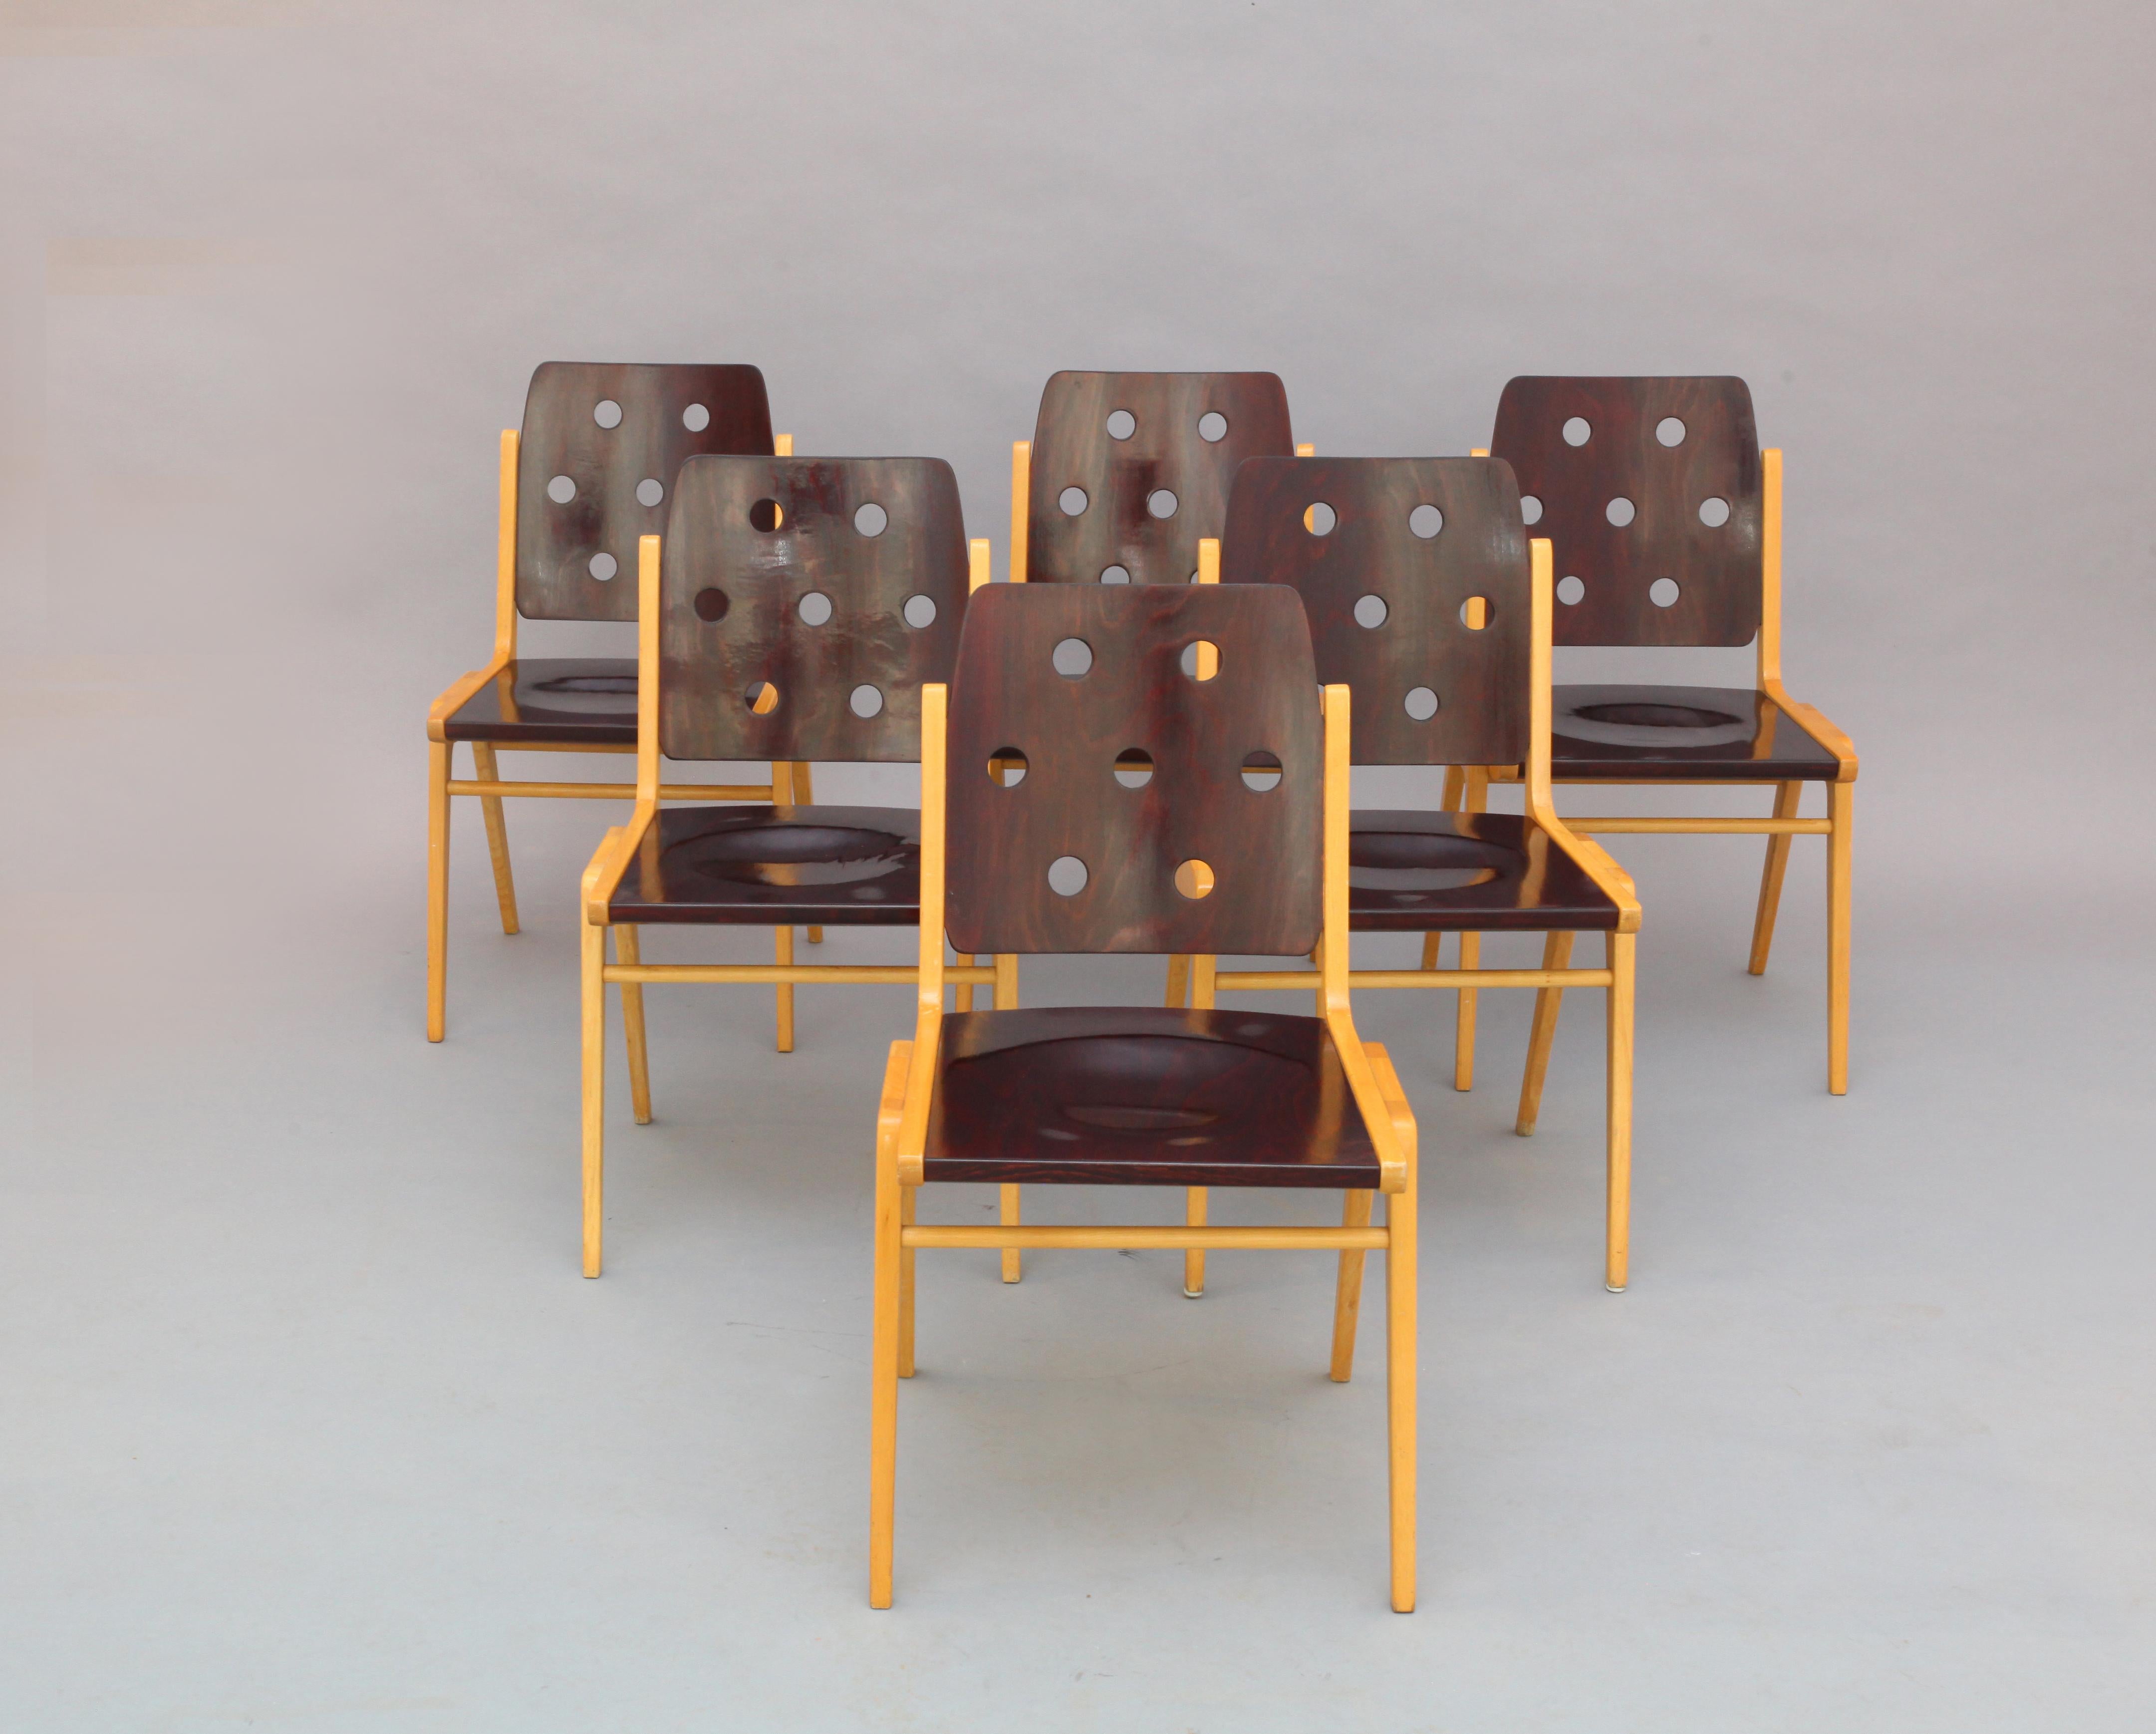 six stacking chairs by Franz Schuster for Wiesner Hager,
modell Maestro, bicolor
Vienna 1959,
Austria,
Forum Stadtpark
solid beech, bicolor.